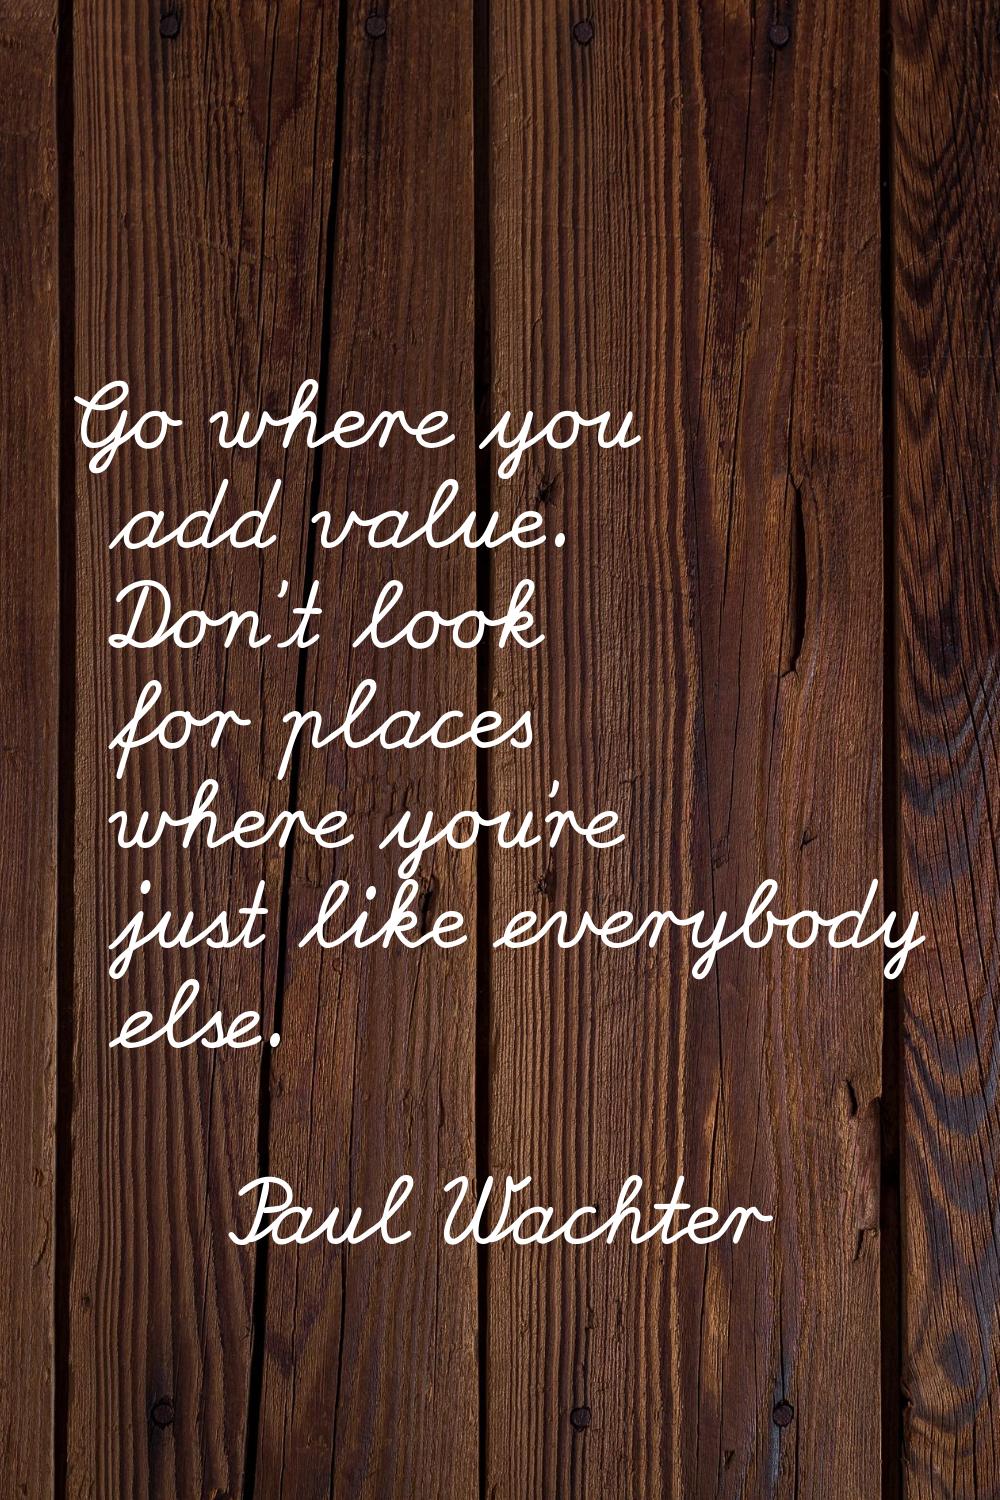 Go where you add value. Don't look for places where you're just like everybody else.